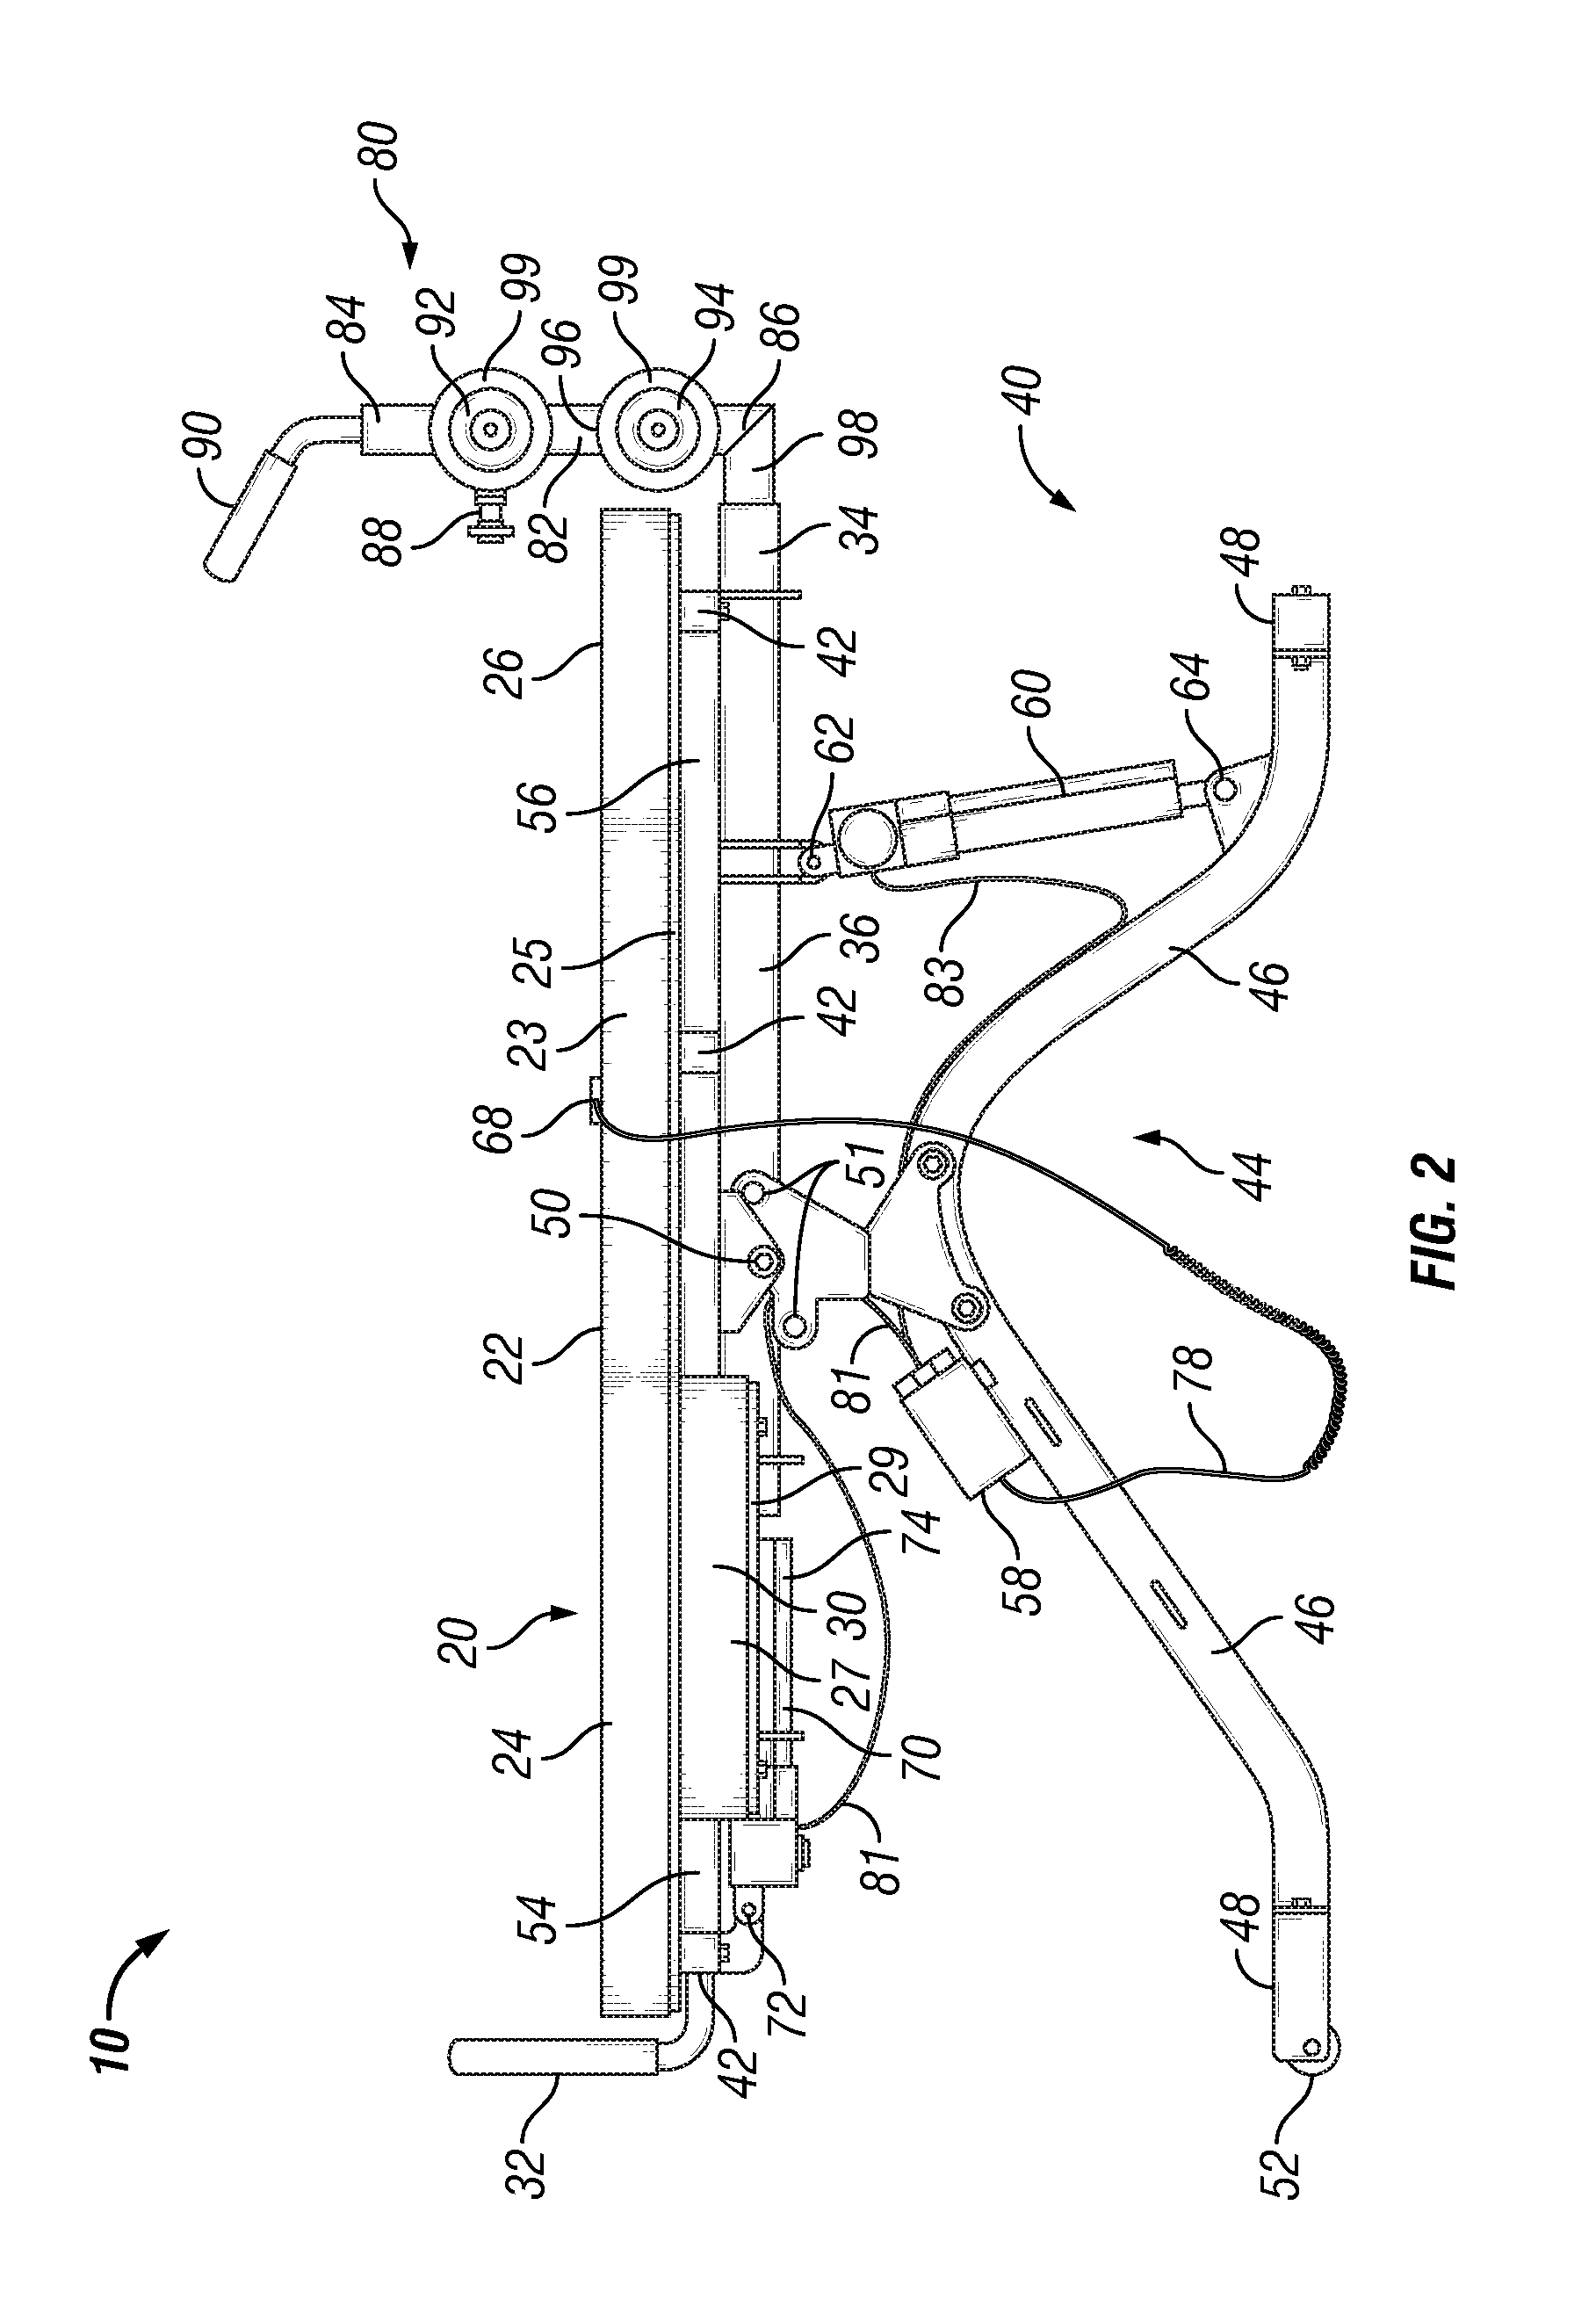 Apparatus and method of gravity-assisted spinal stretching